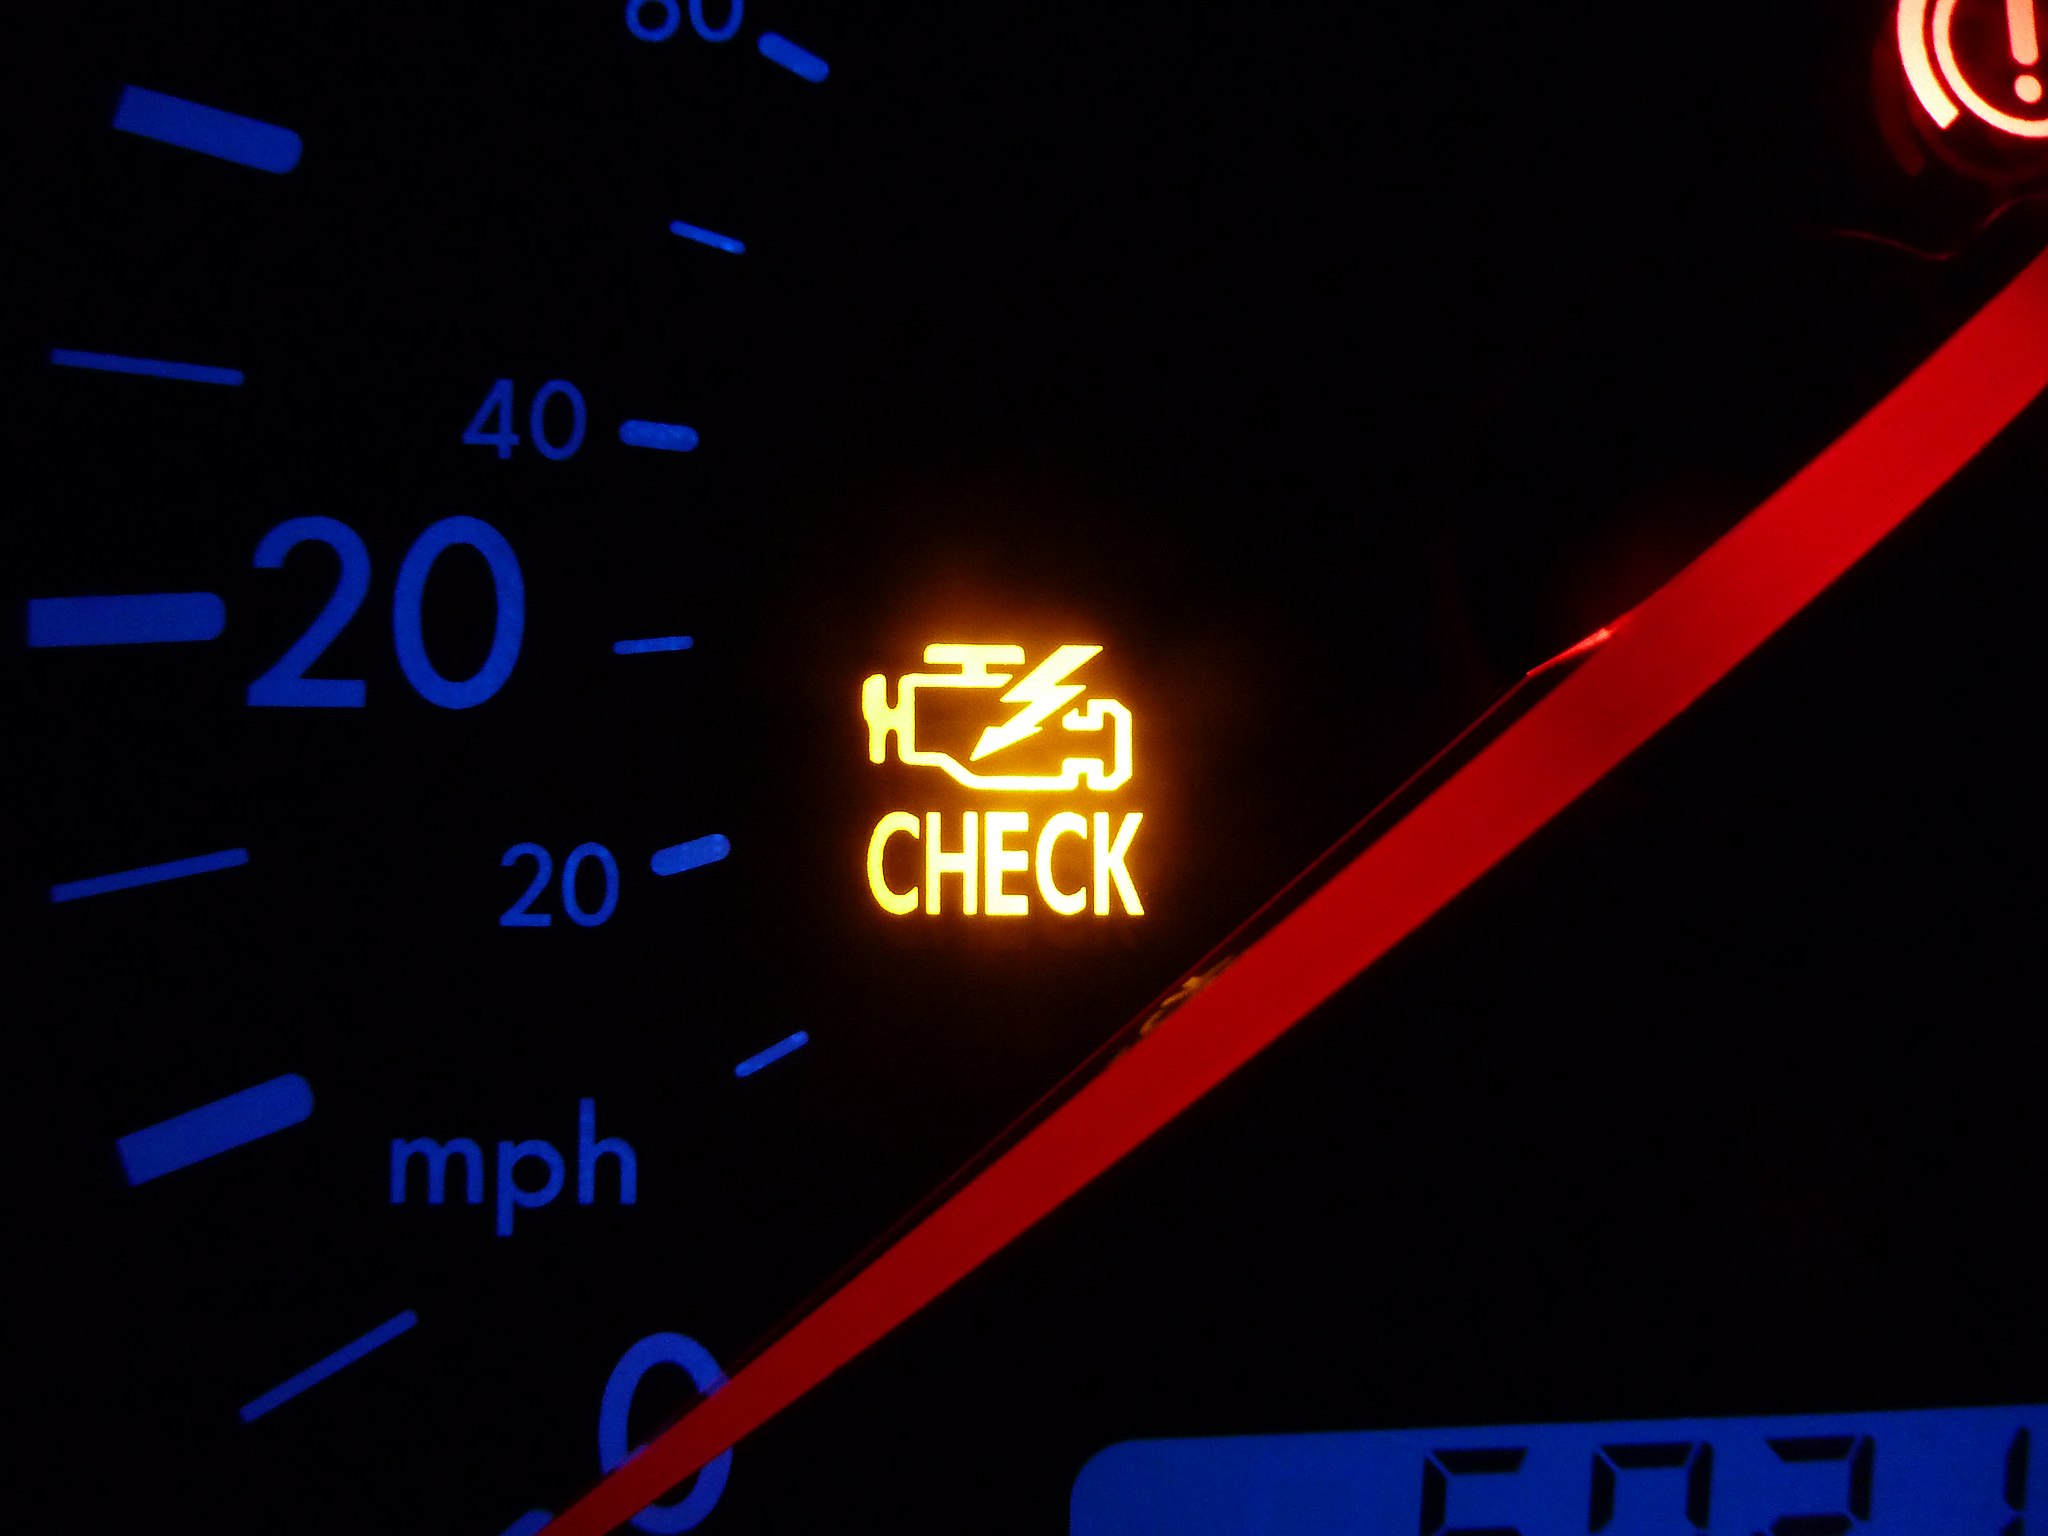 A check engine light on a VW instrument panel